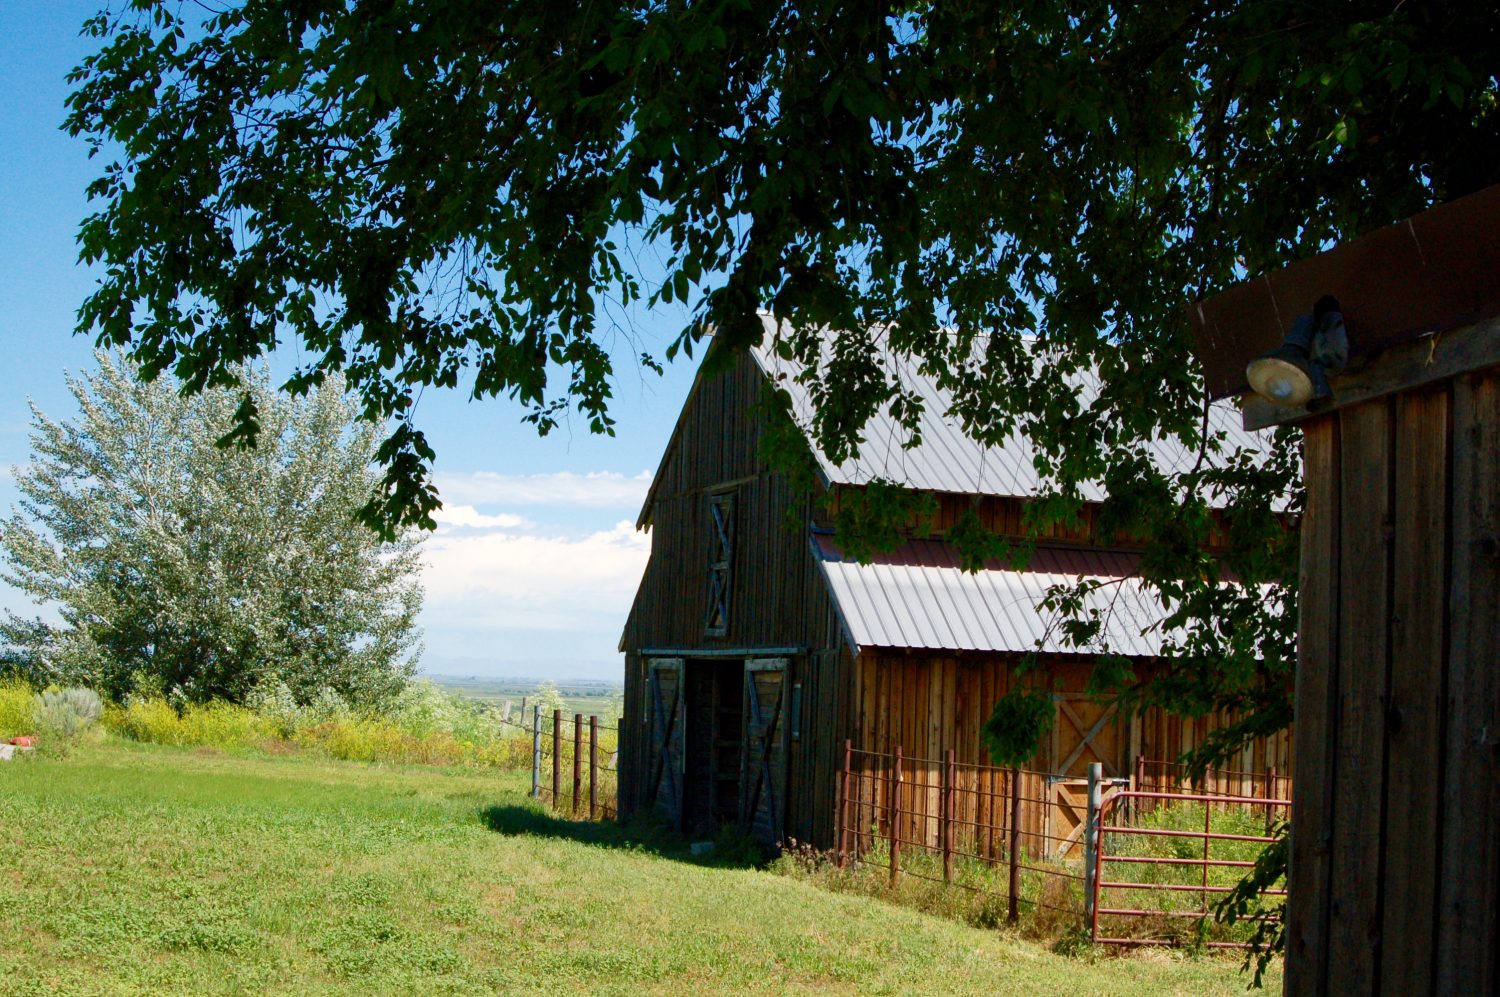 View of an old barn under the view of some trees.